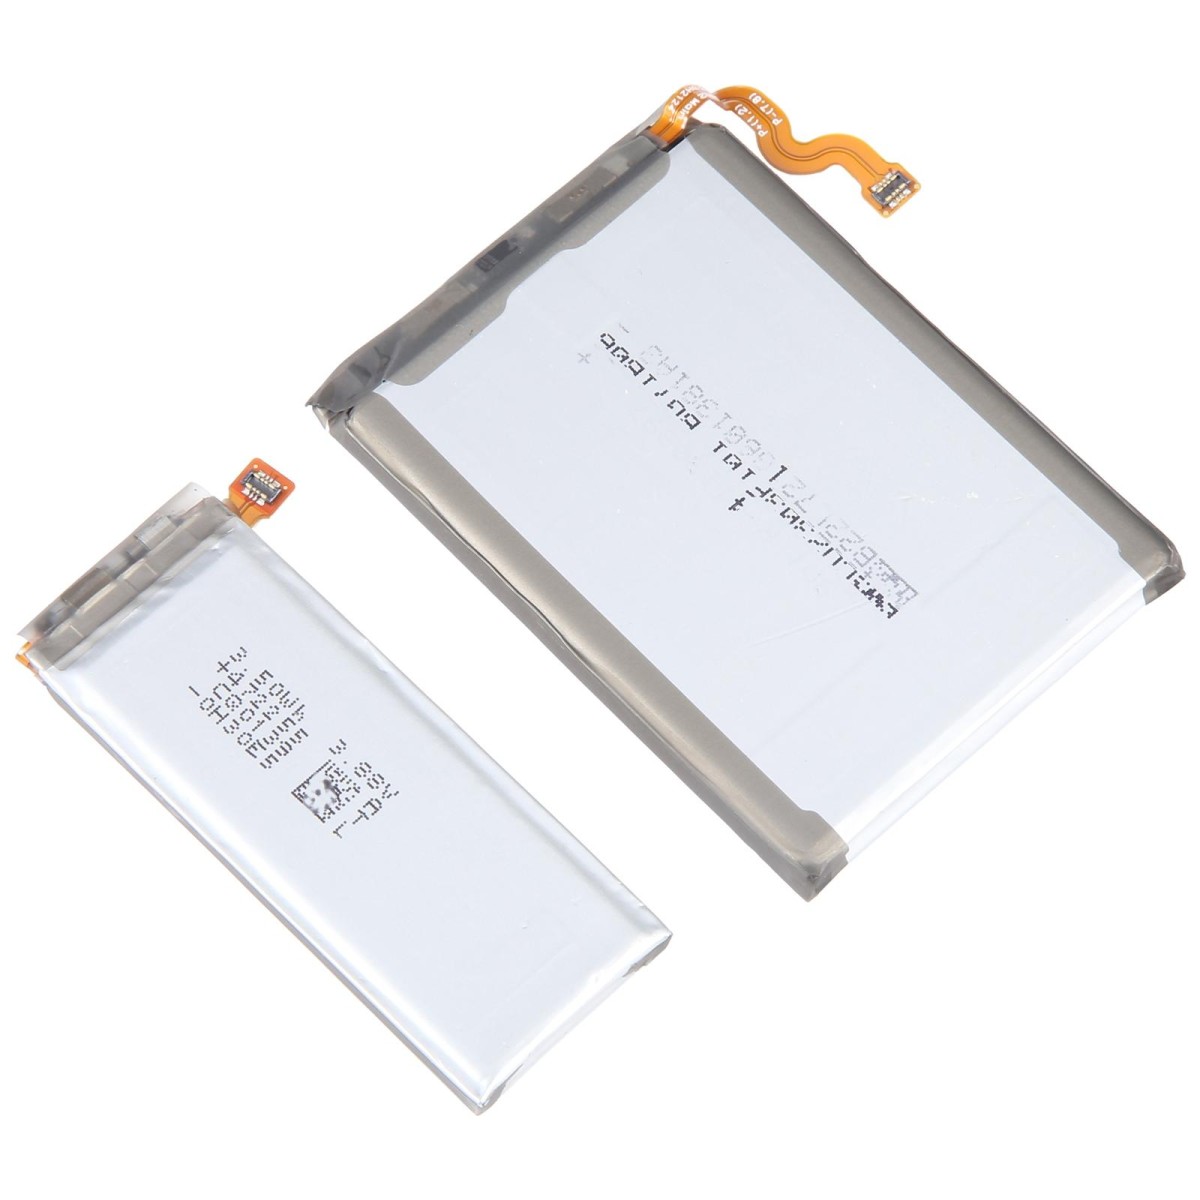 EB-BF711ABY EB-BF712ABY 1 Pair 930mAh 2370mAh Battery Replacement For Samsung Galaxy Z Flip3 5G SM-F711U